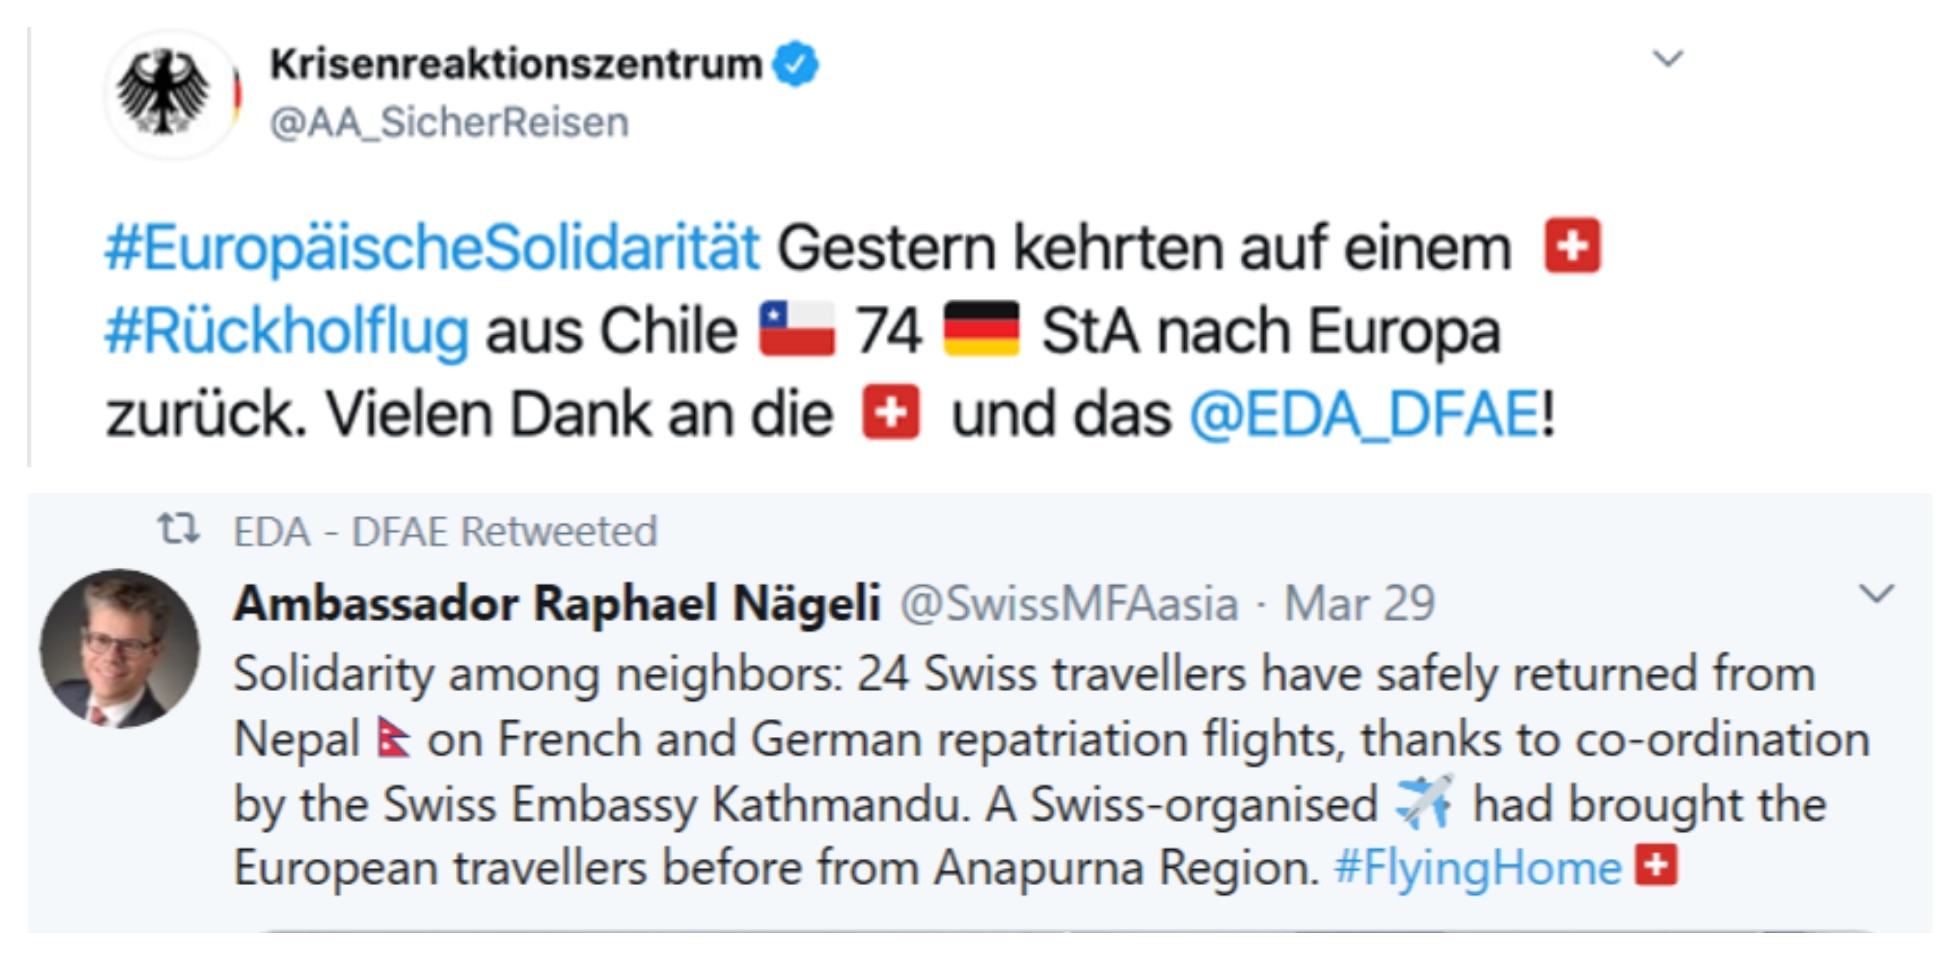 Screenshots of two tweets in which Germany thanks Switzerland and Switzerland thanks Germany for return flights.